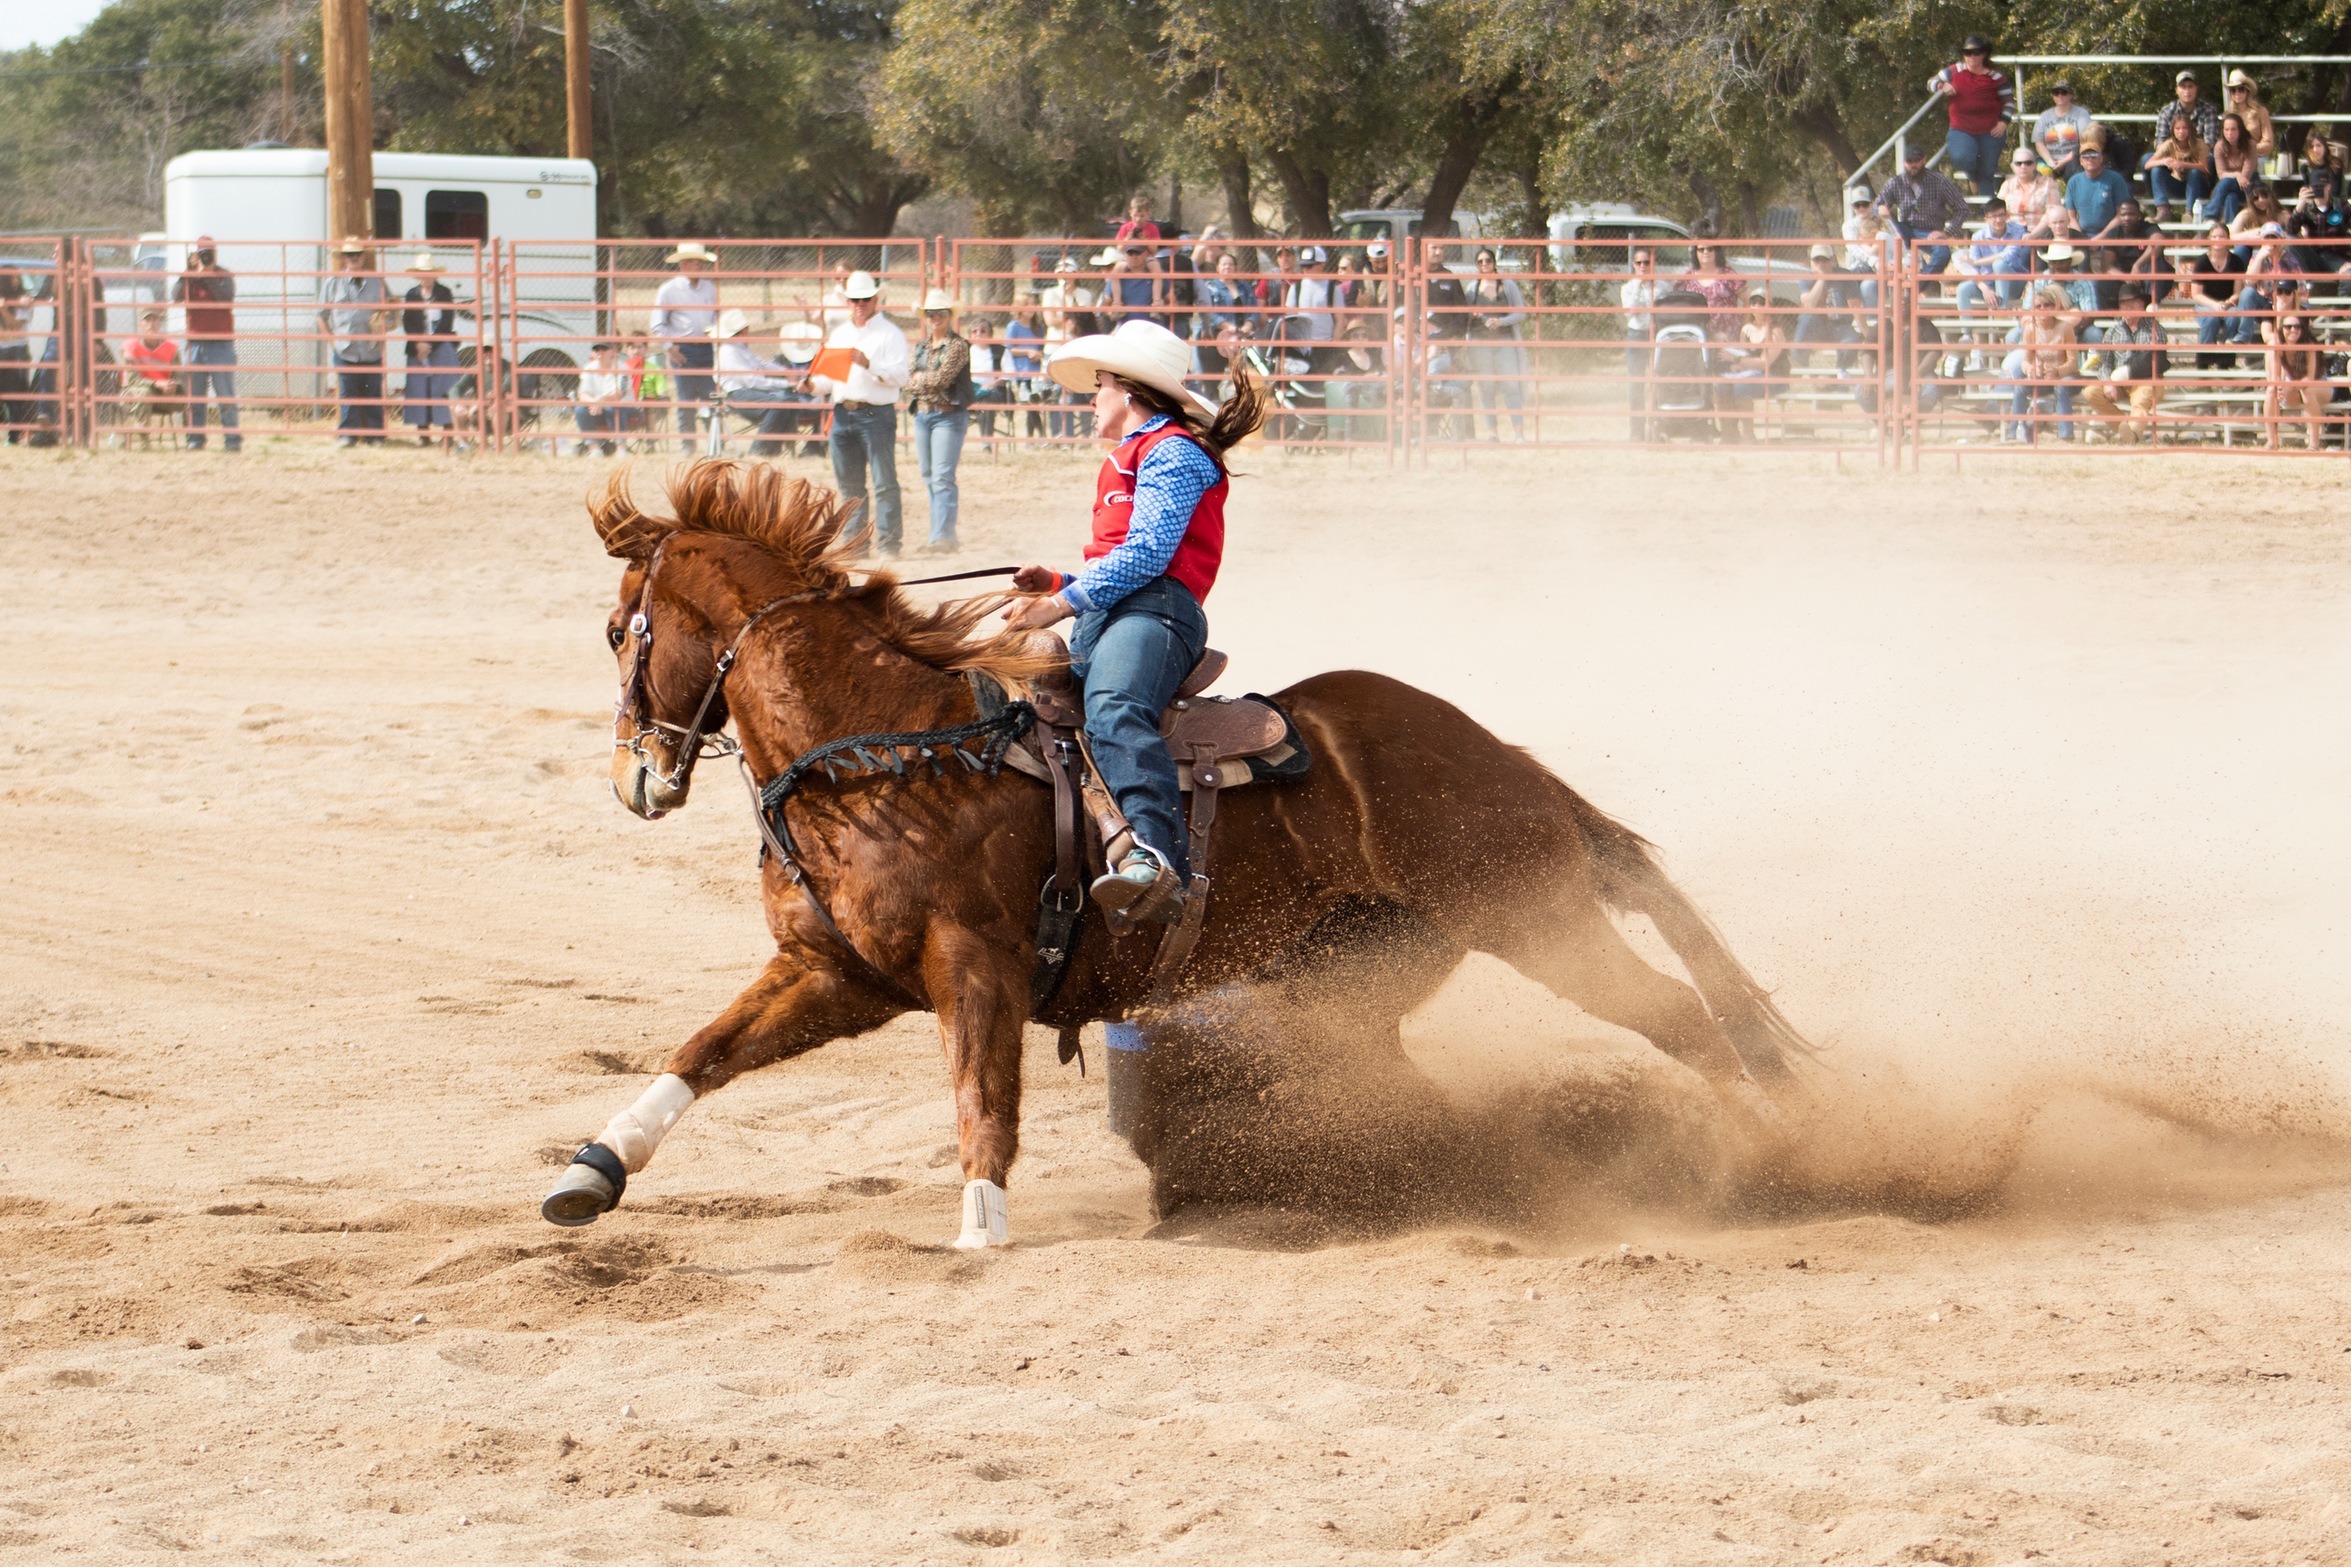 Rodeo athlete competes in event